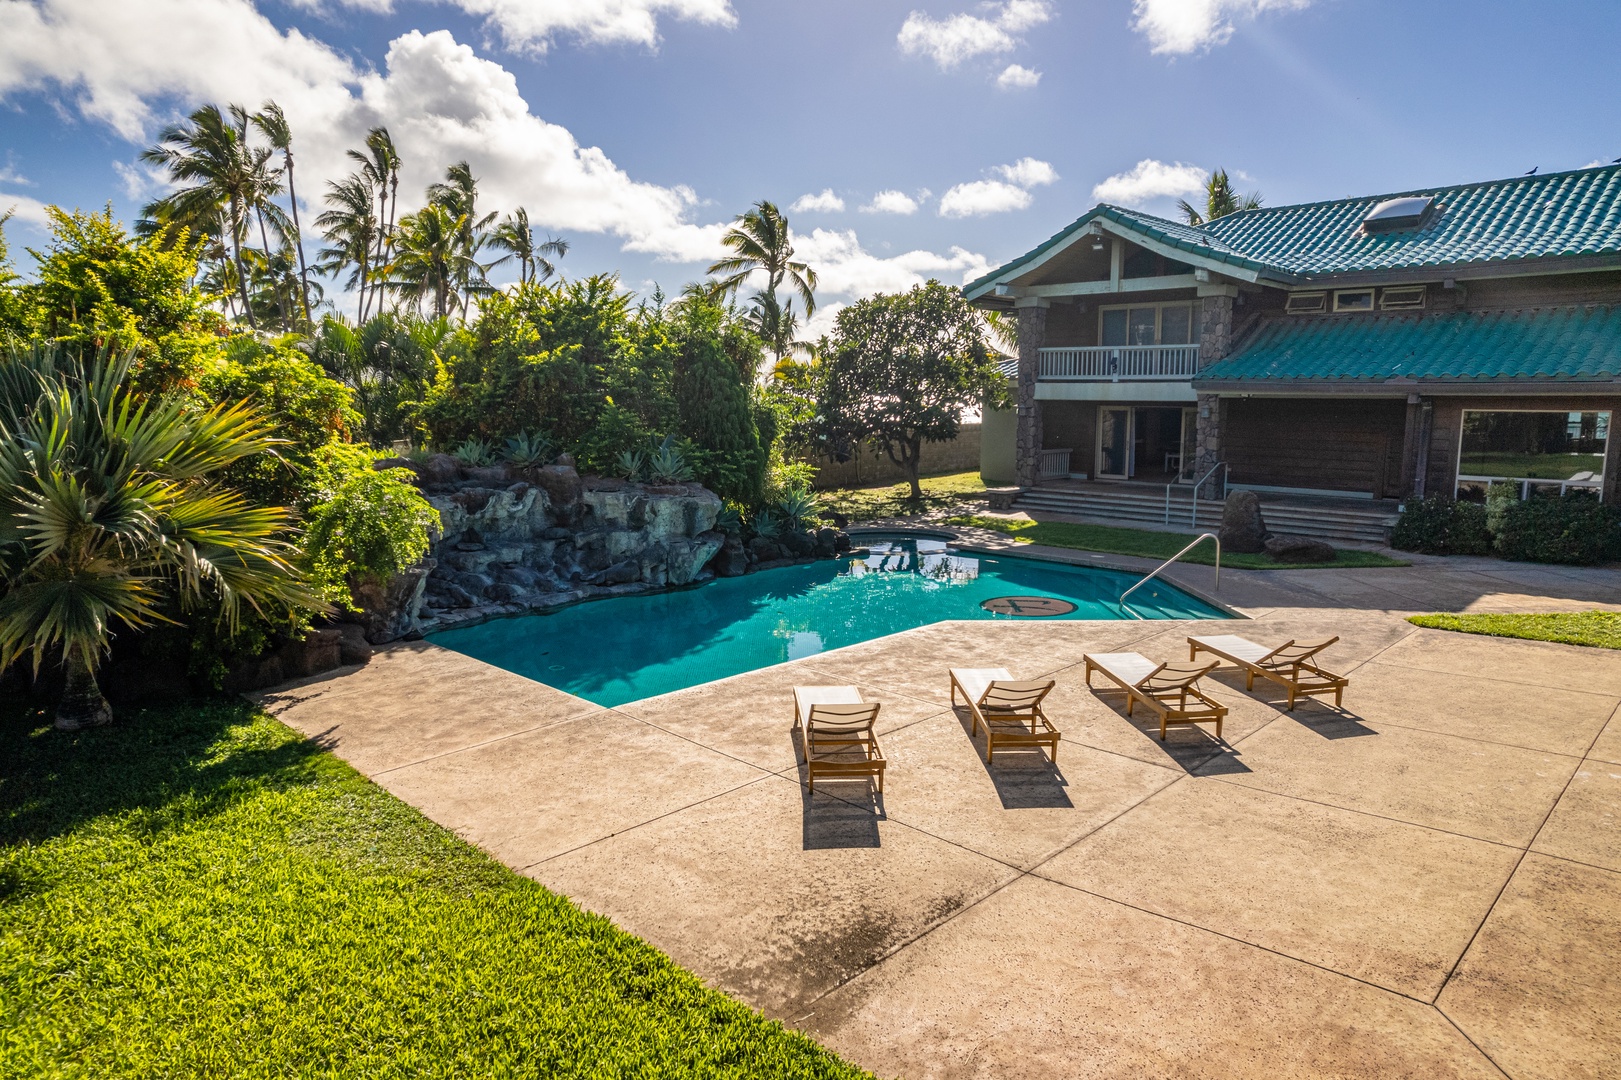 Waianae Vacation Rentals, Konishiki Beachhouse - Quench the island heat with a dip in the pool.